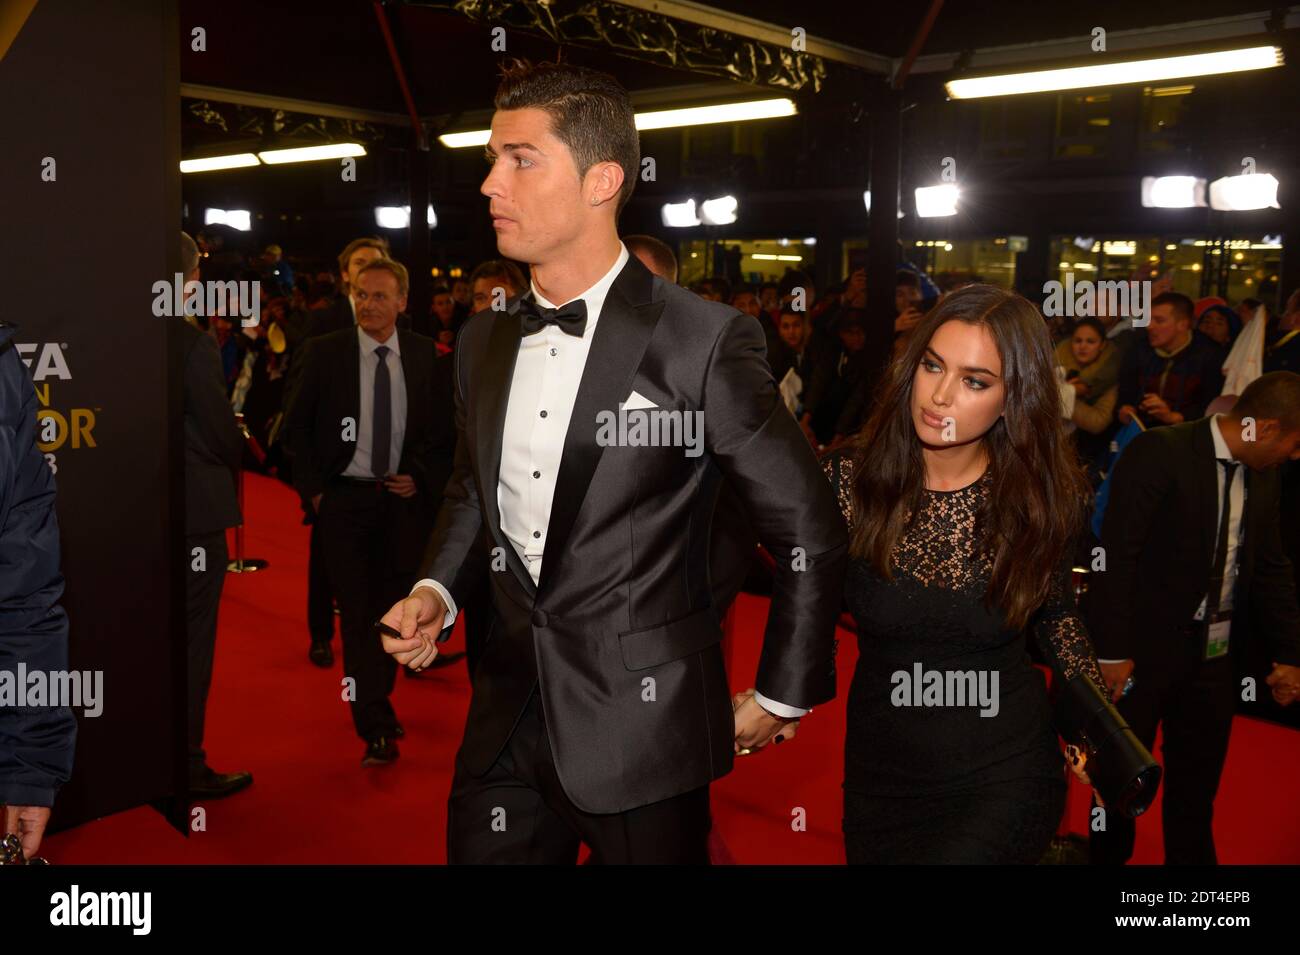 Portugal's Cristiano Ronaldo and his partner Irina Shayk during a photo  call prior to the FIFA Ballon d'Or 2013 gala at the Kongresshalle in  Zurich, Switzerland, on January 13, 2014. Photo by